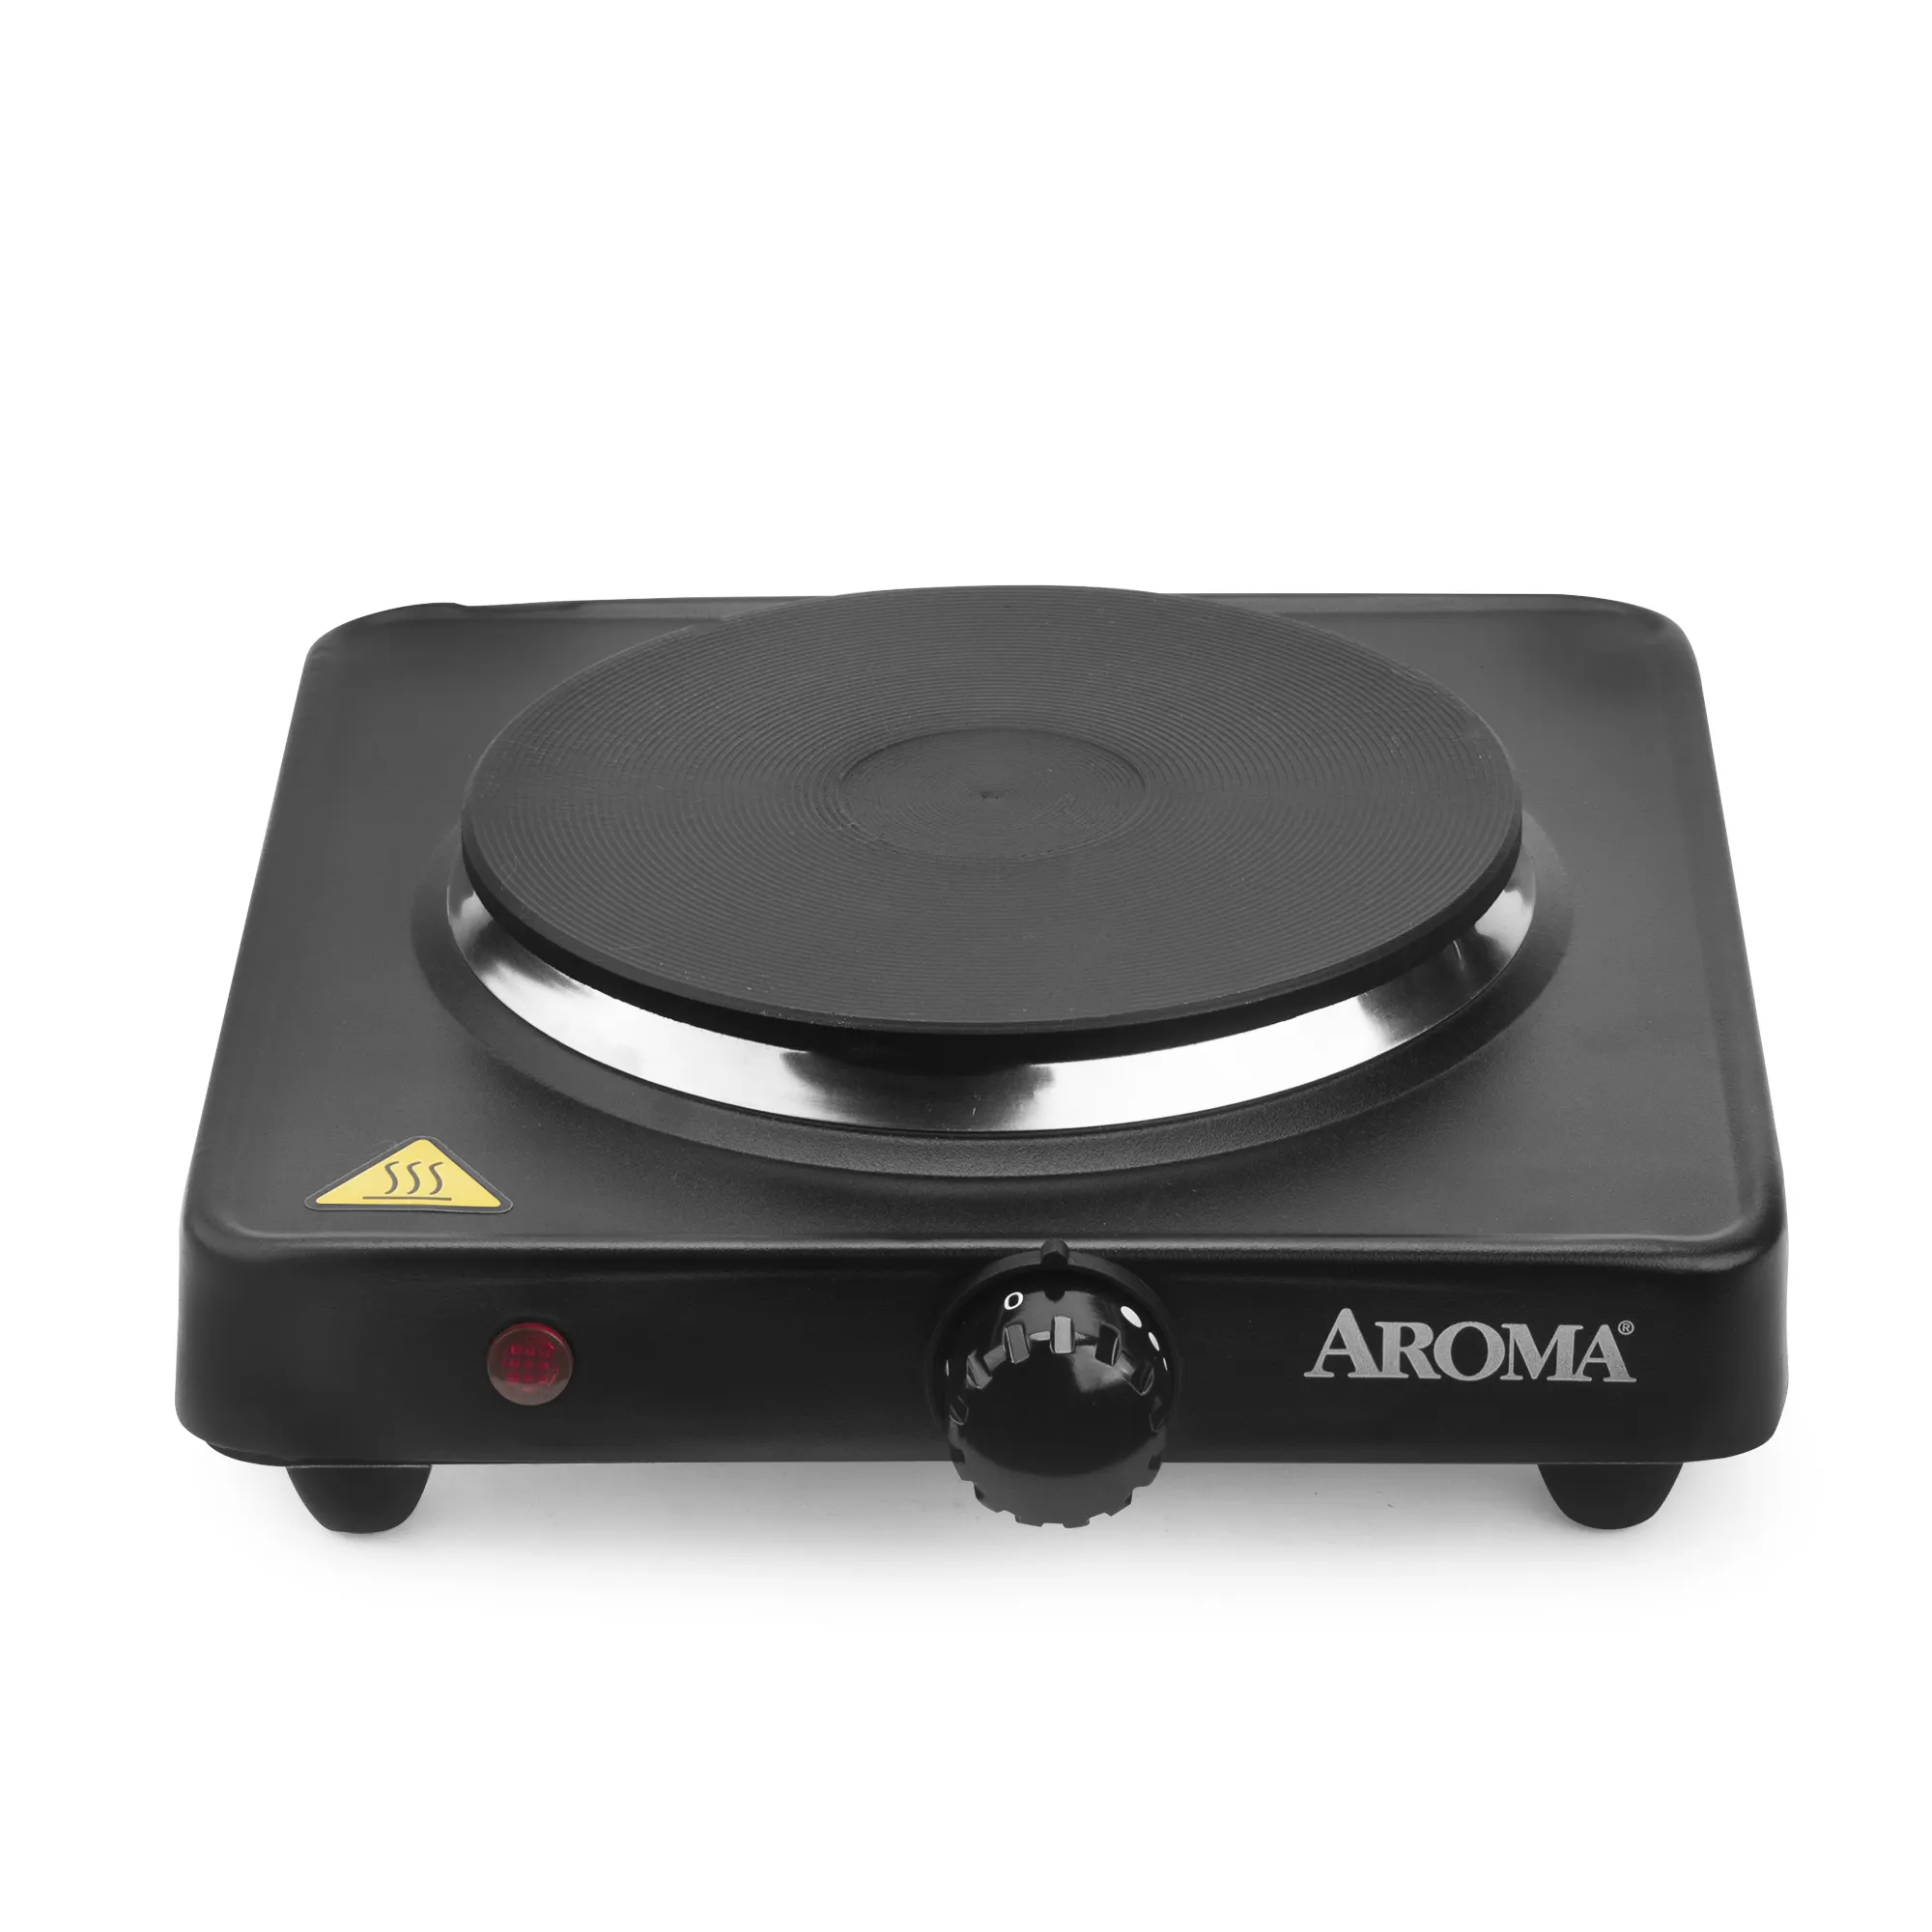 AROMA Single Burner Die-Cast Hot Plate Compact & Portable with Temperature Control